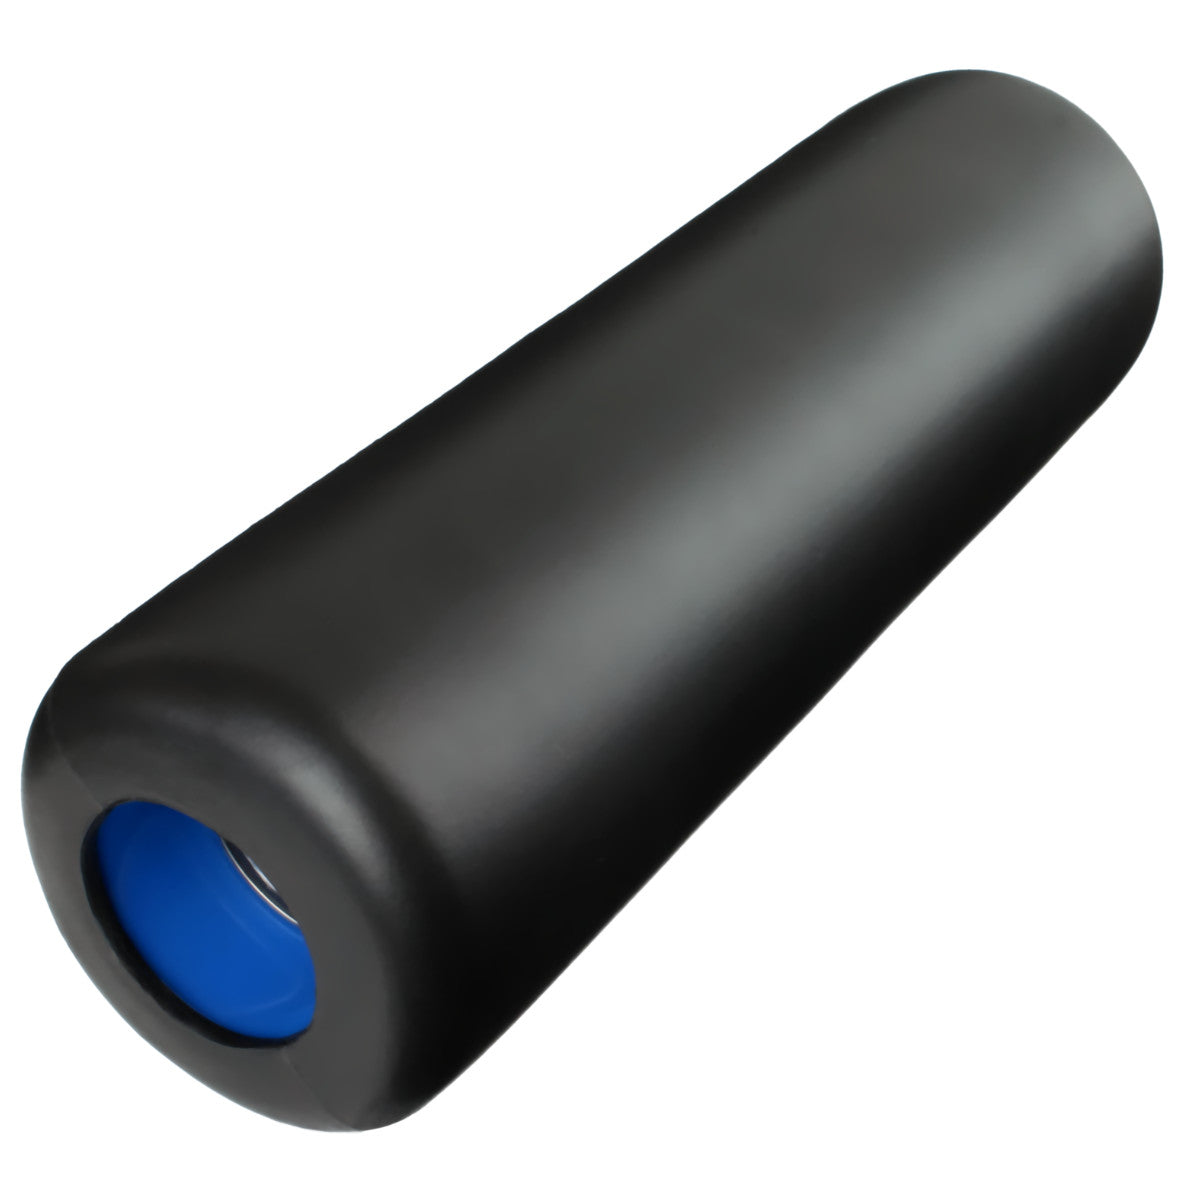 DoubleUP Smooth Soft-Density Quick-Change Muscle Roller - DoubleUP Roller